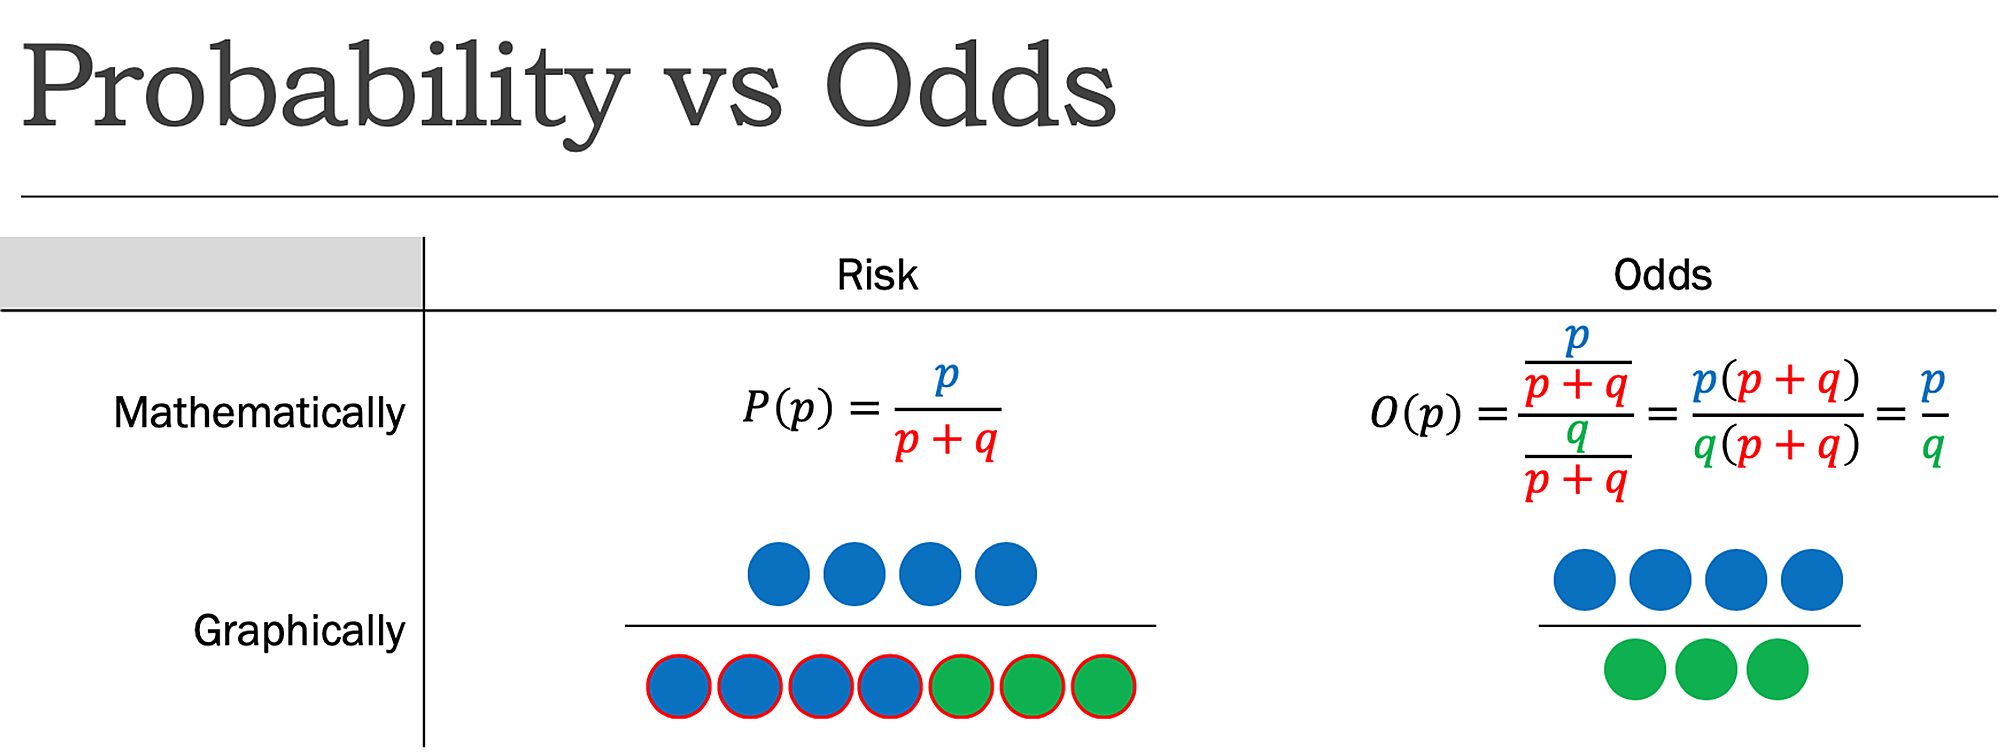 Cureus What S The Risk Differentiating Risk Ratios Odds Ratios And Hazard Ratios